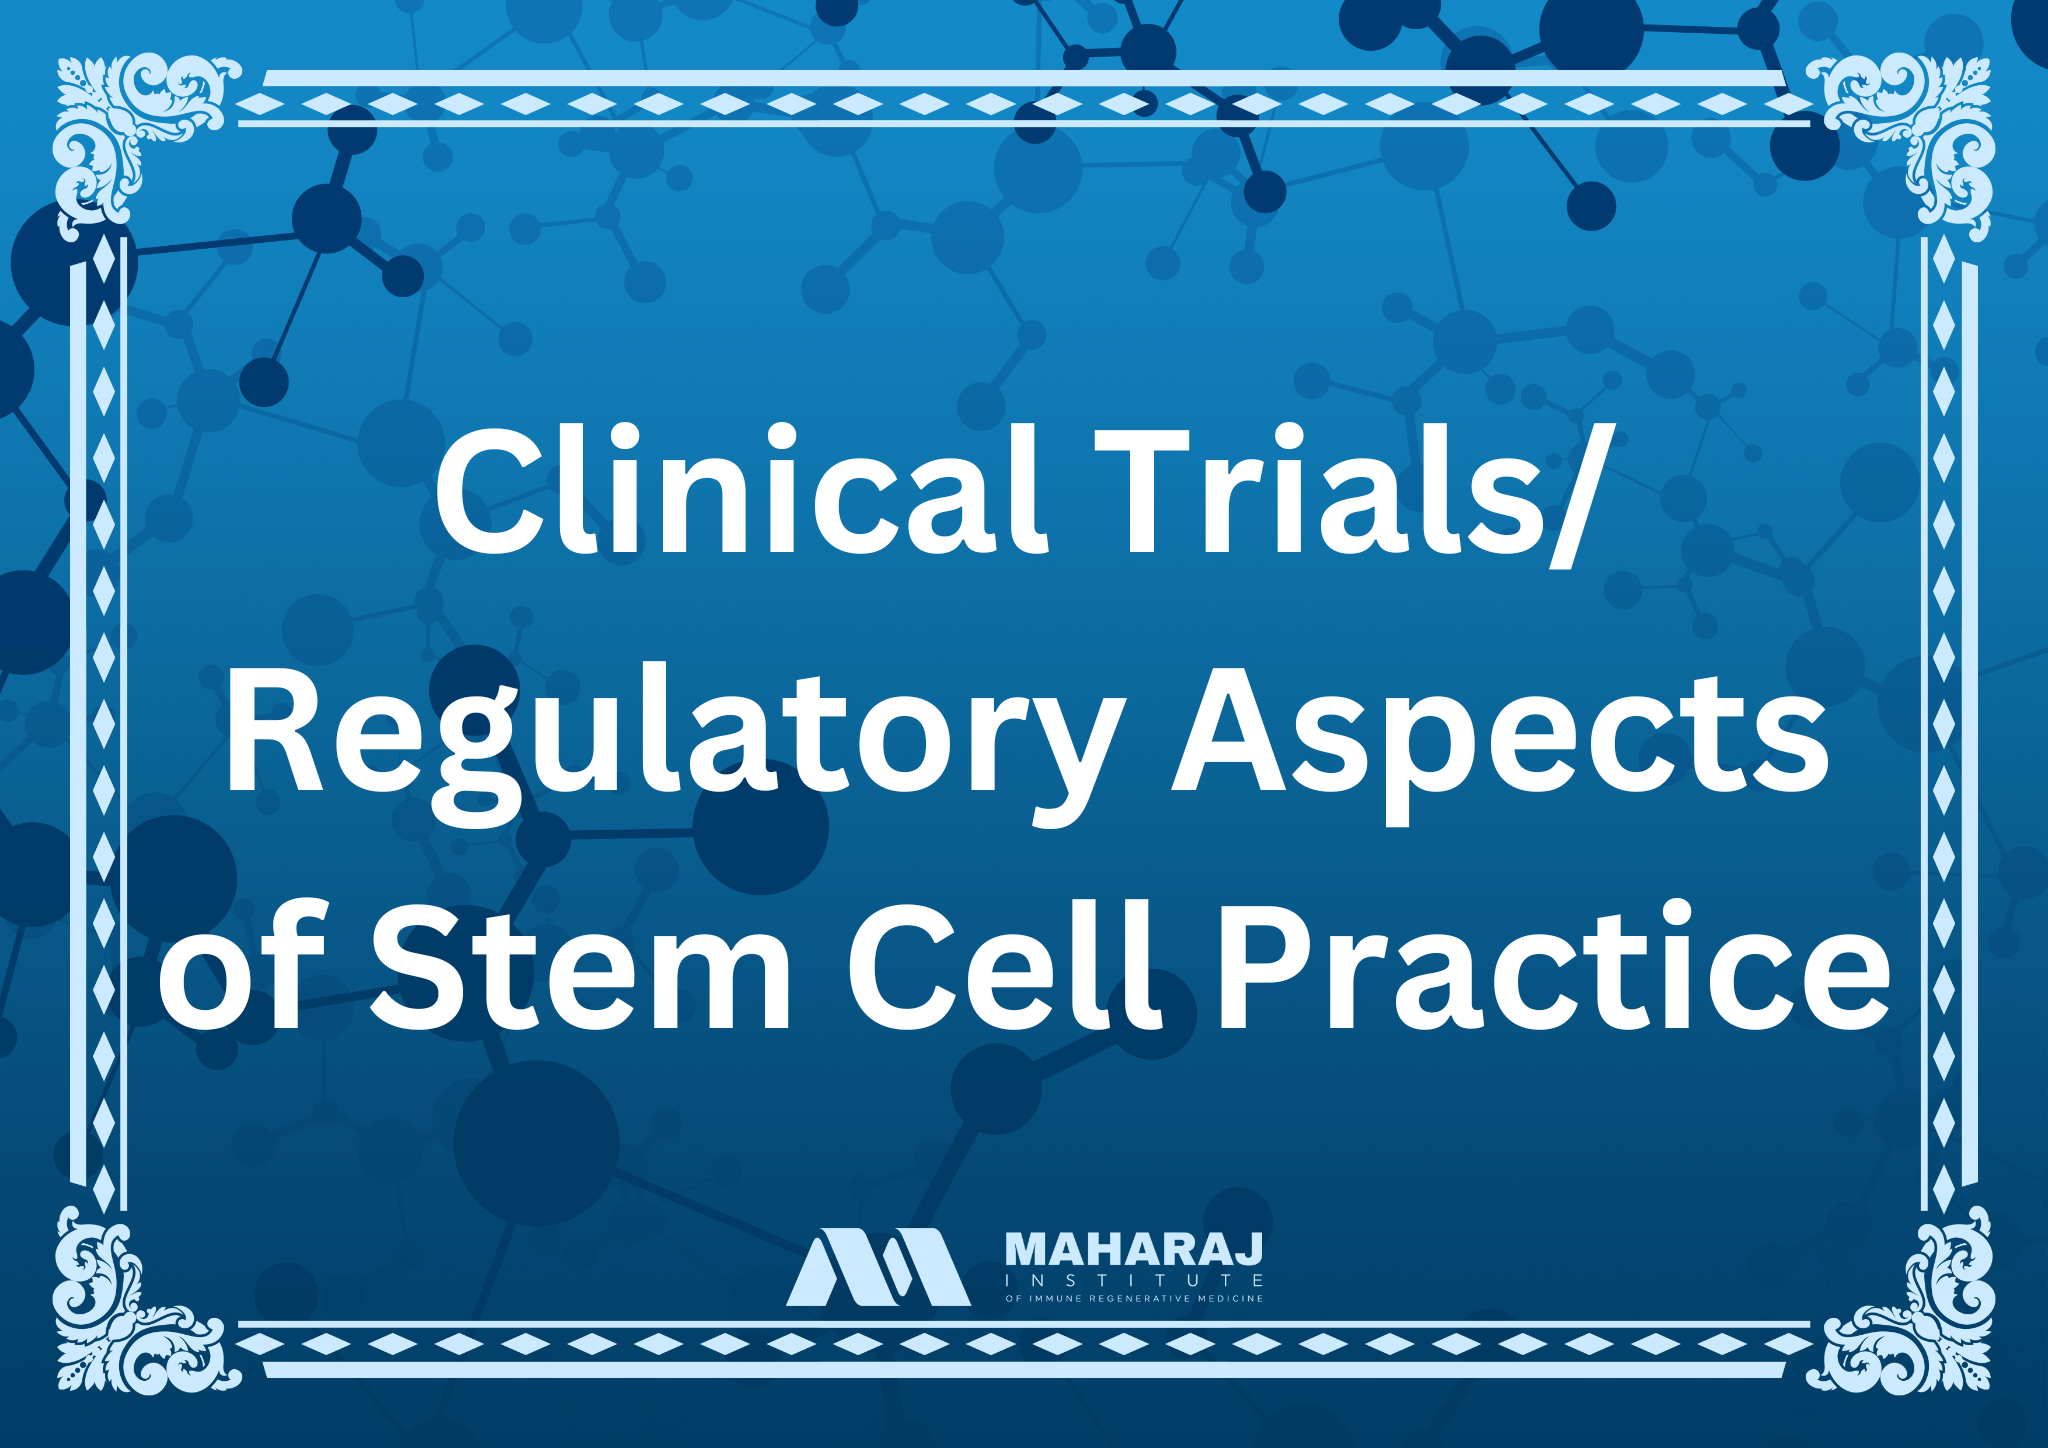 Clinical Trials/Regulatory Aspects of Stem Cell Practice